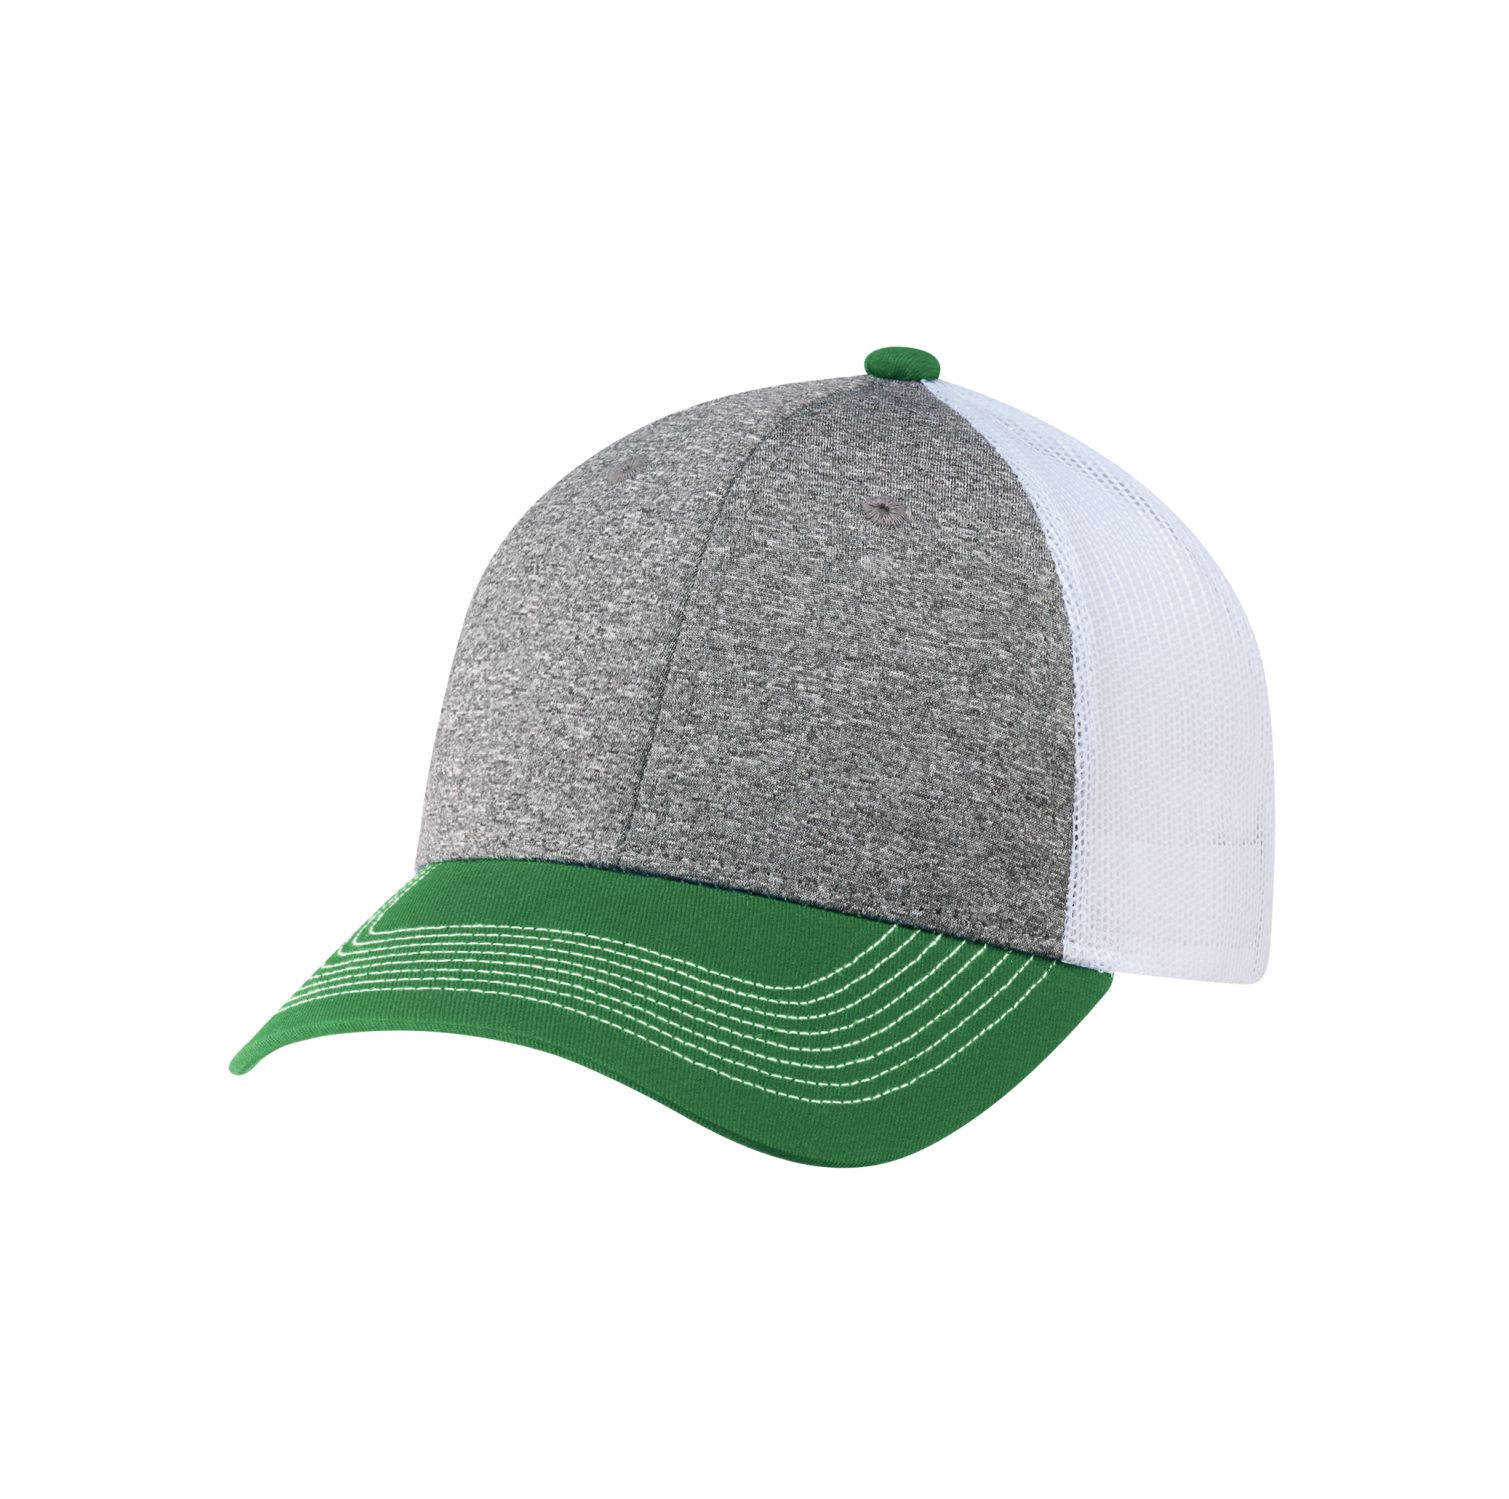 AJM Cotton Drill / Polyester Heather / Nylon Mesh 6 Panel Constructed Full-Fit Hat (Mesh Back) #4G645M Kelly Green / Charcoal / White